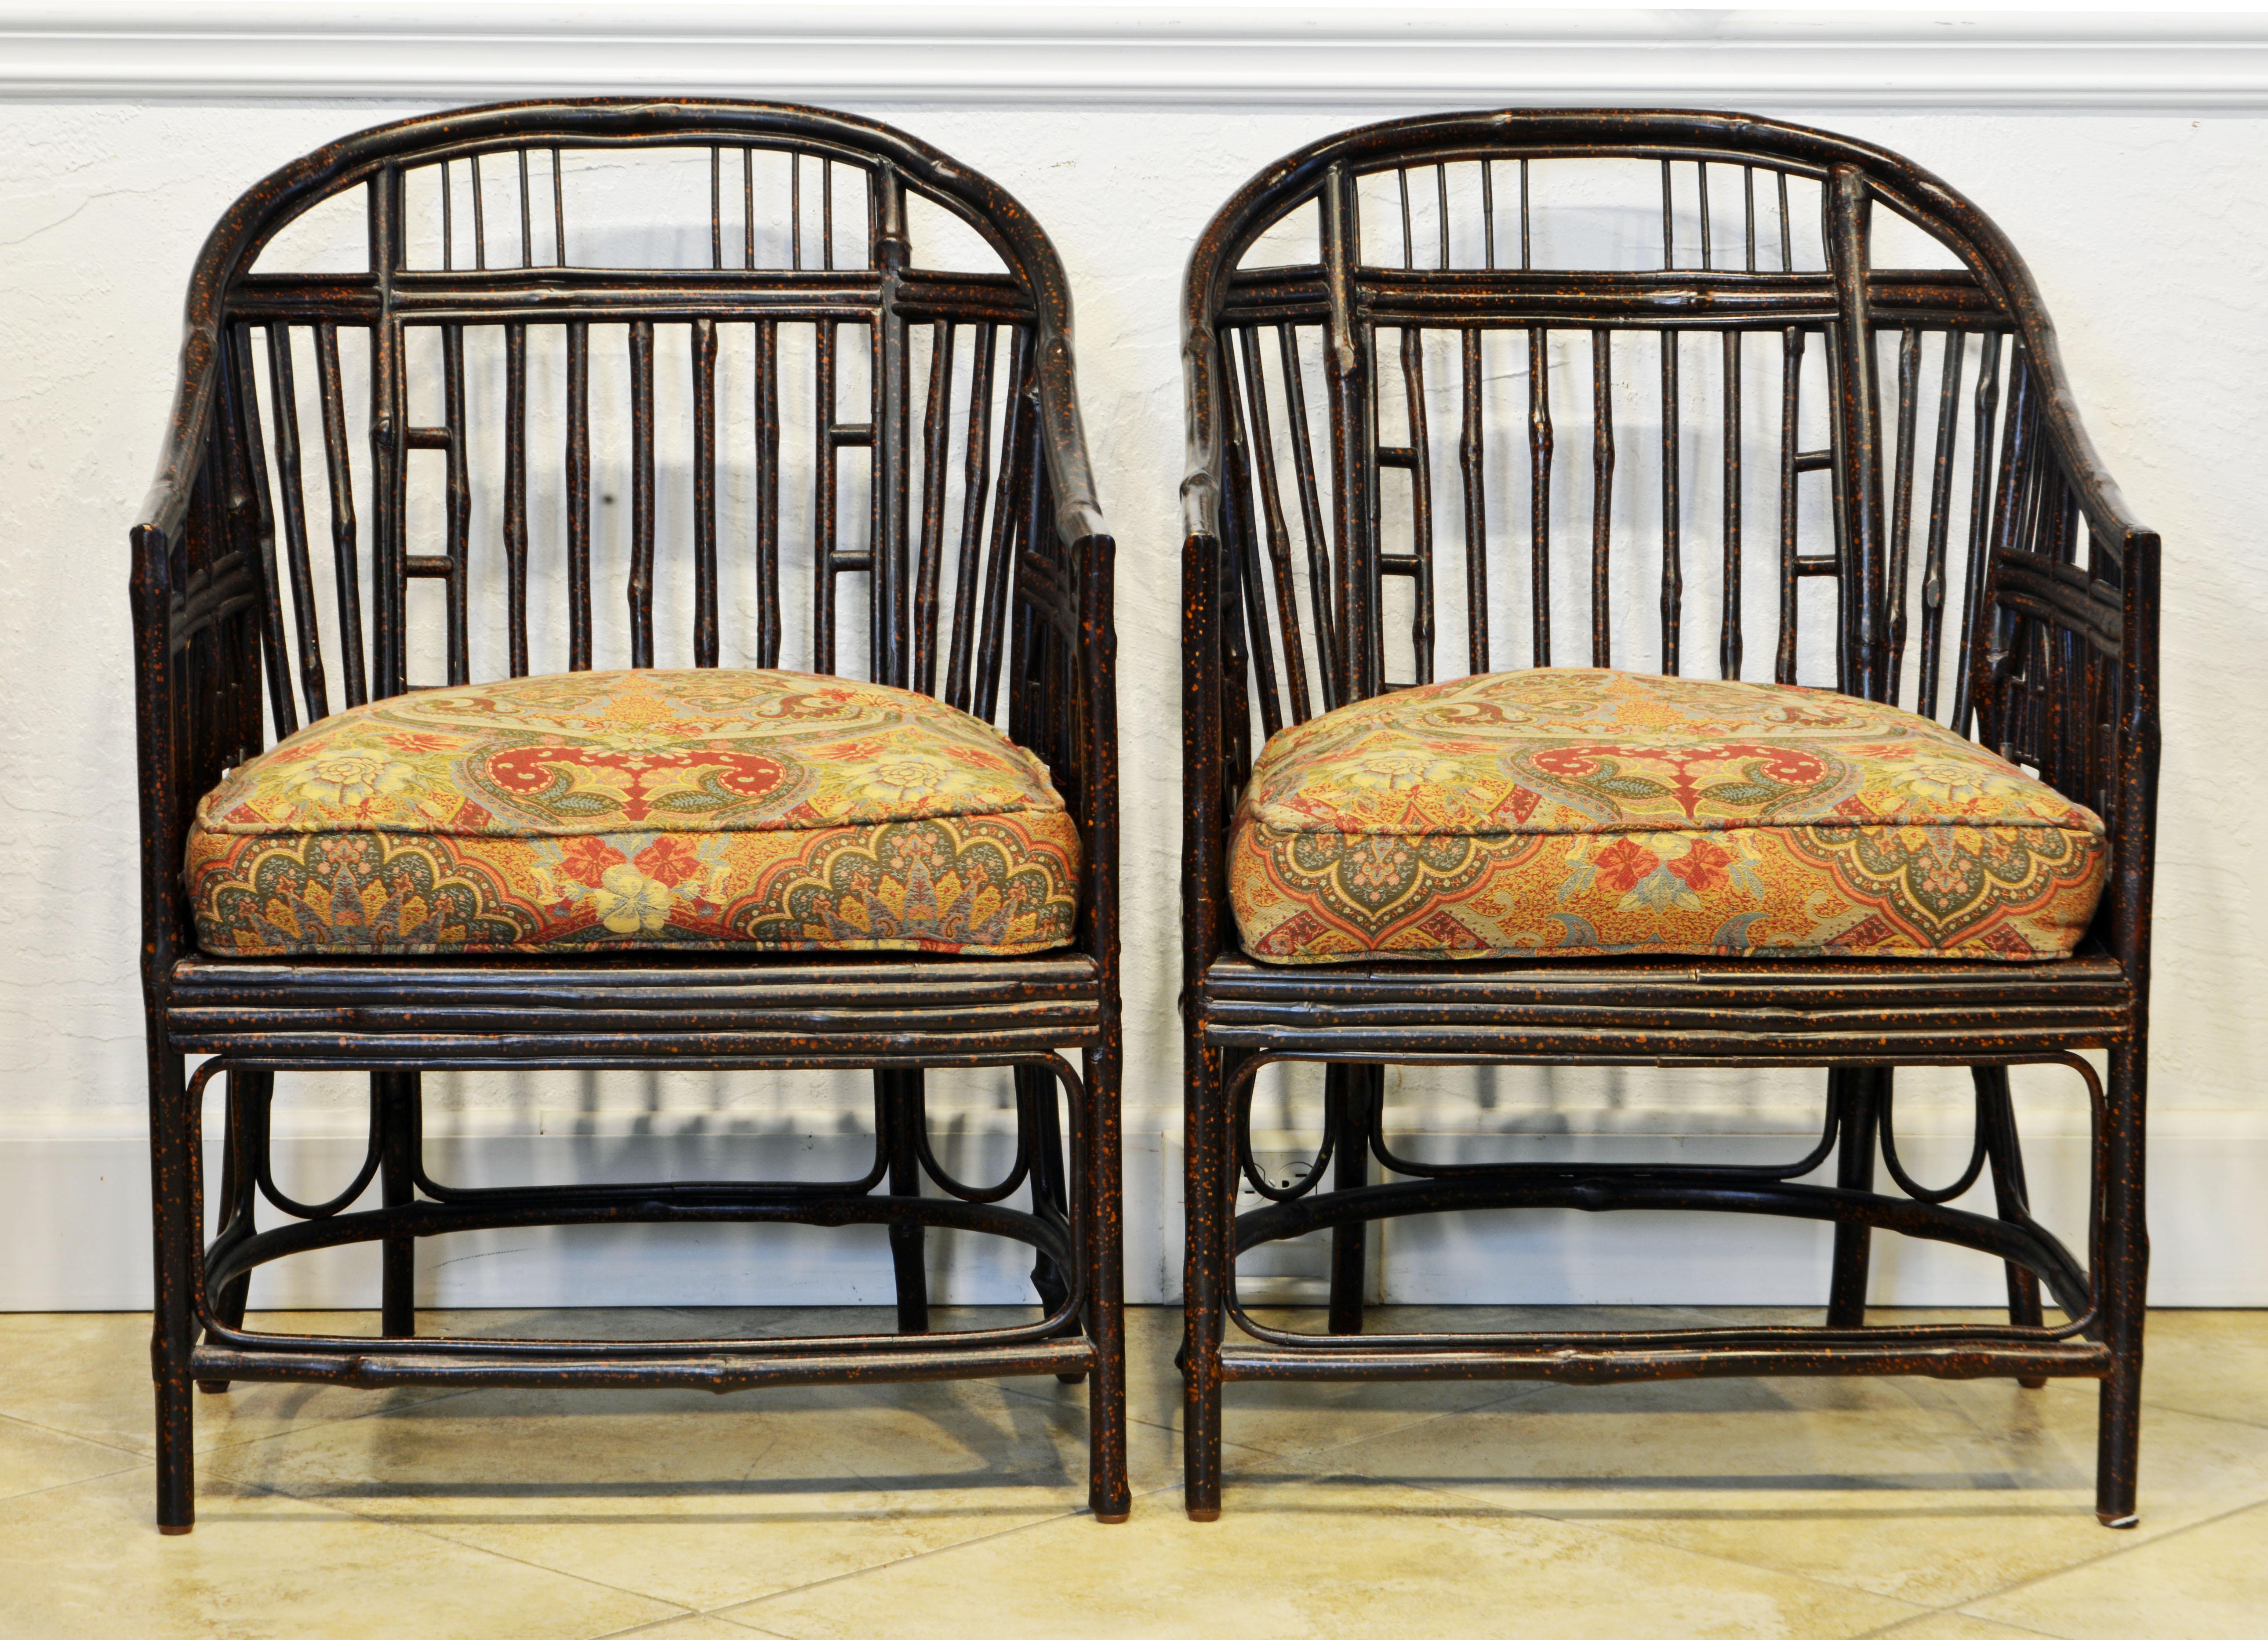 Of generous proportions these unusual Brighton Pavillion style chinoiserie bamboo chairs feature horse shoe top rails above backrests and sides with bamboo open work incorporating Chinese symbols. The seats are covered with comfortable cushions of